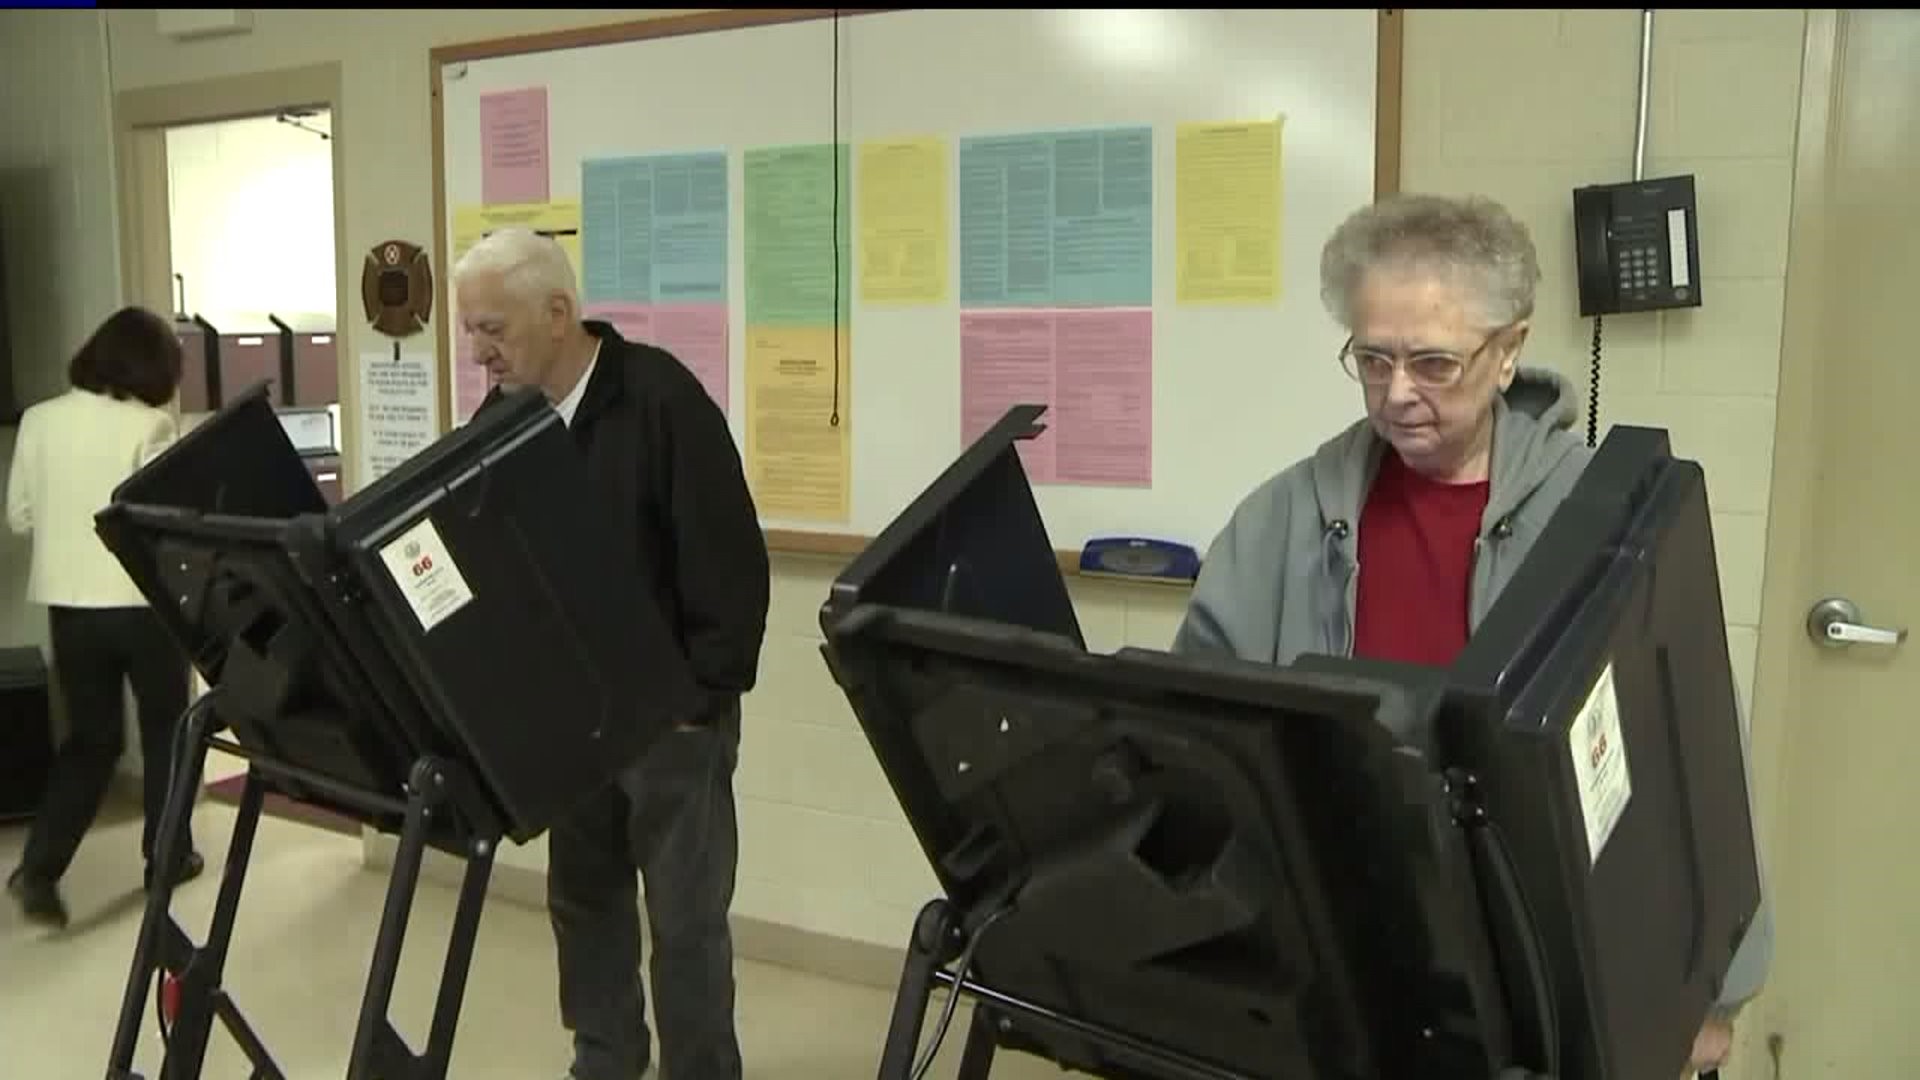 Some Voters Puzzled by New Congressional Districts in Primary